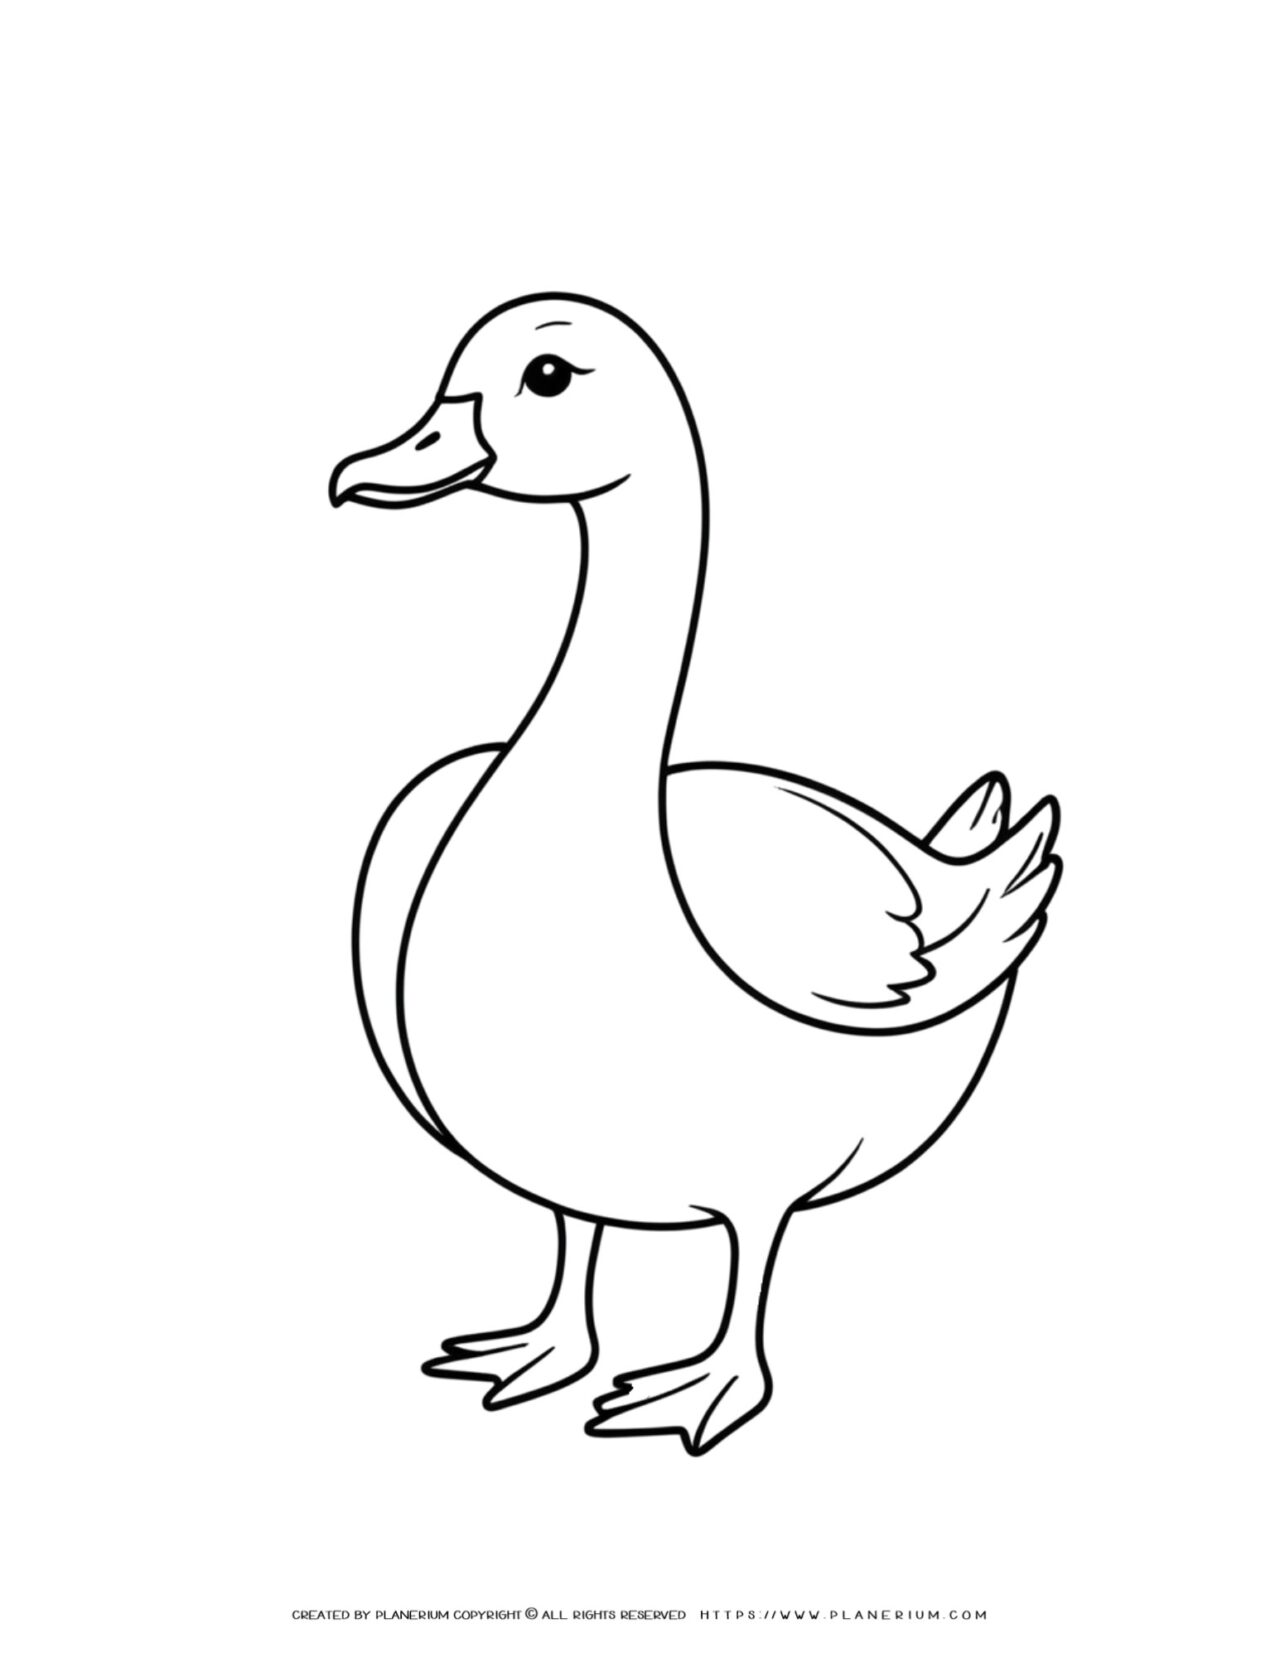 goose-farm-coloring-page-for-kids